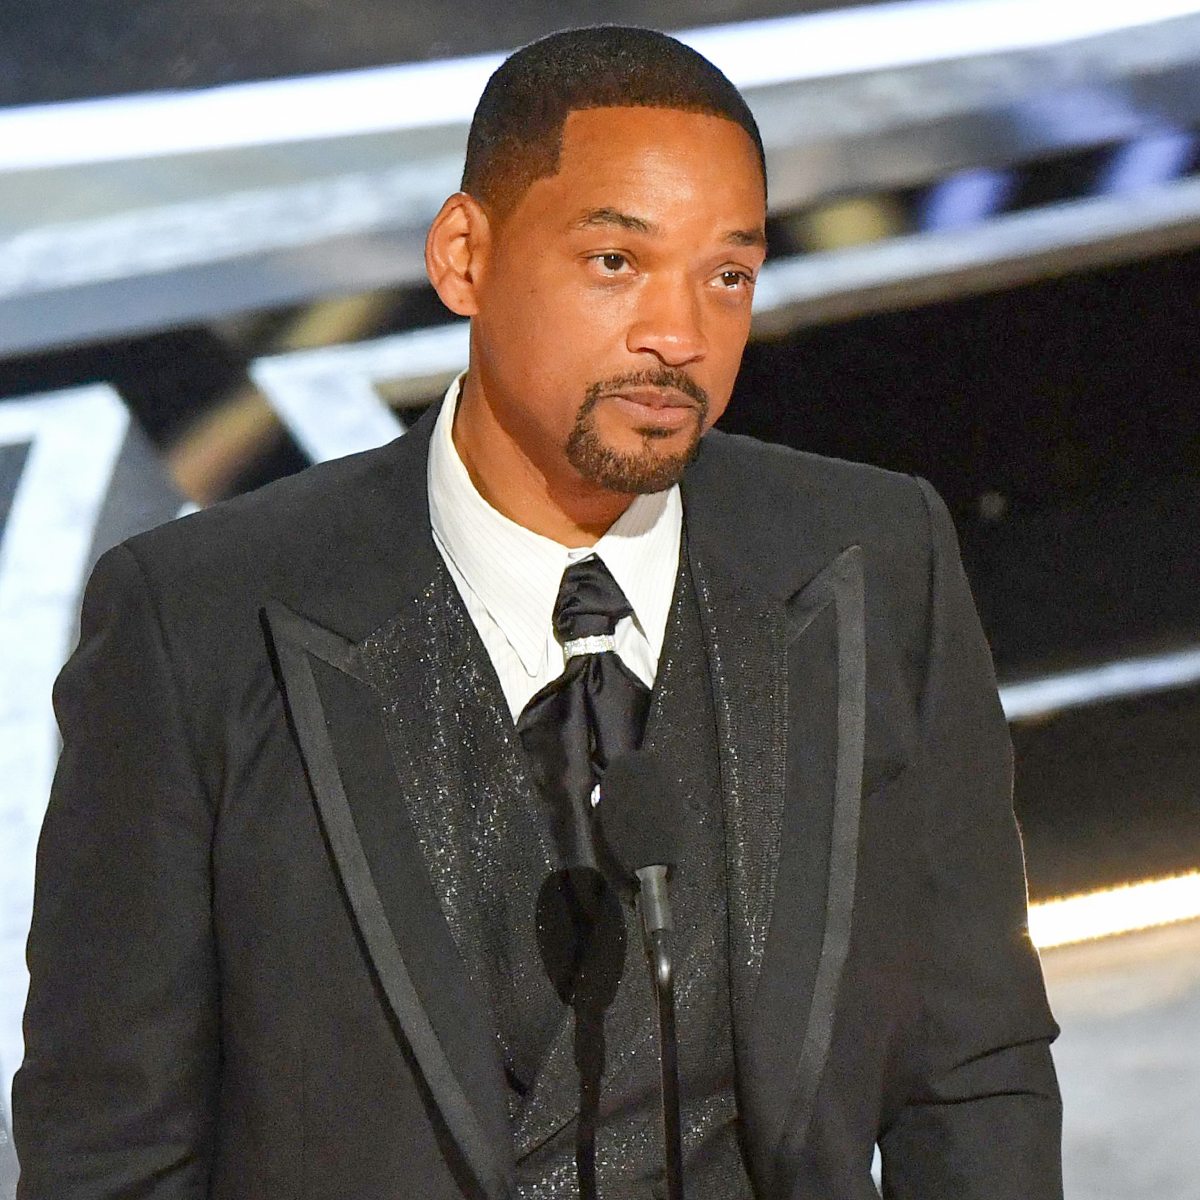 Will Smith Resigns From Academy After Slapping Chris Rock at Oscars